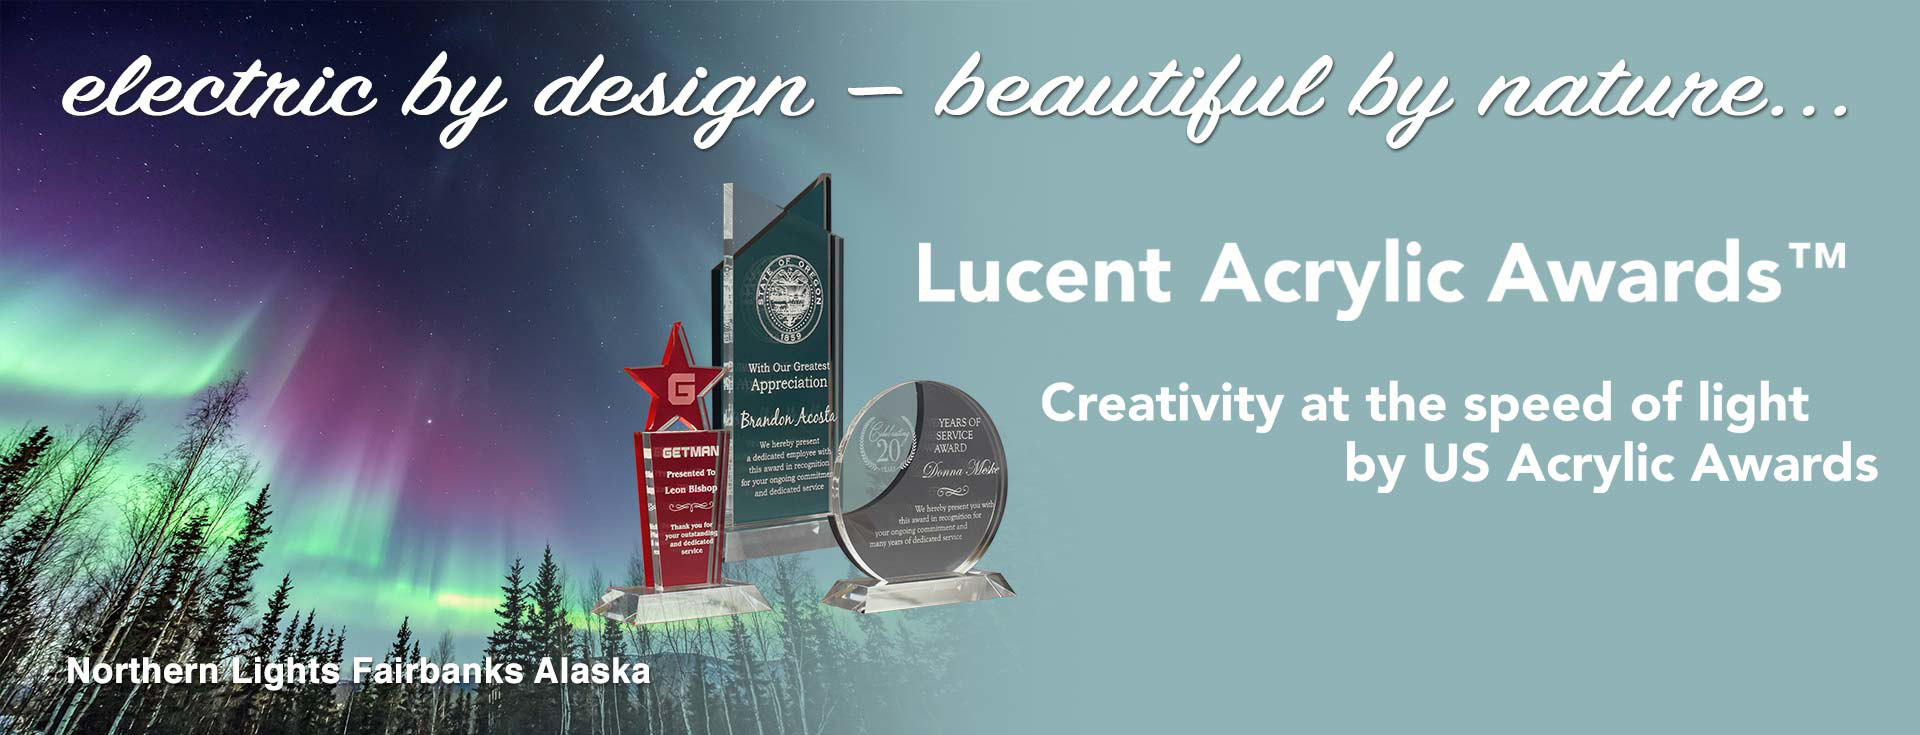 Northern lights over Fairbanks Alaska showing beauty of light and color to represent Lucent™ Acrylic Awards displayed with text electric by design — beautiful by nature...